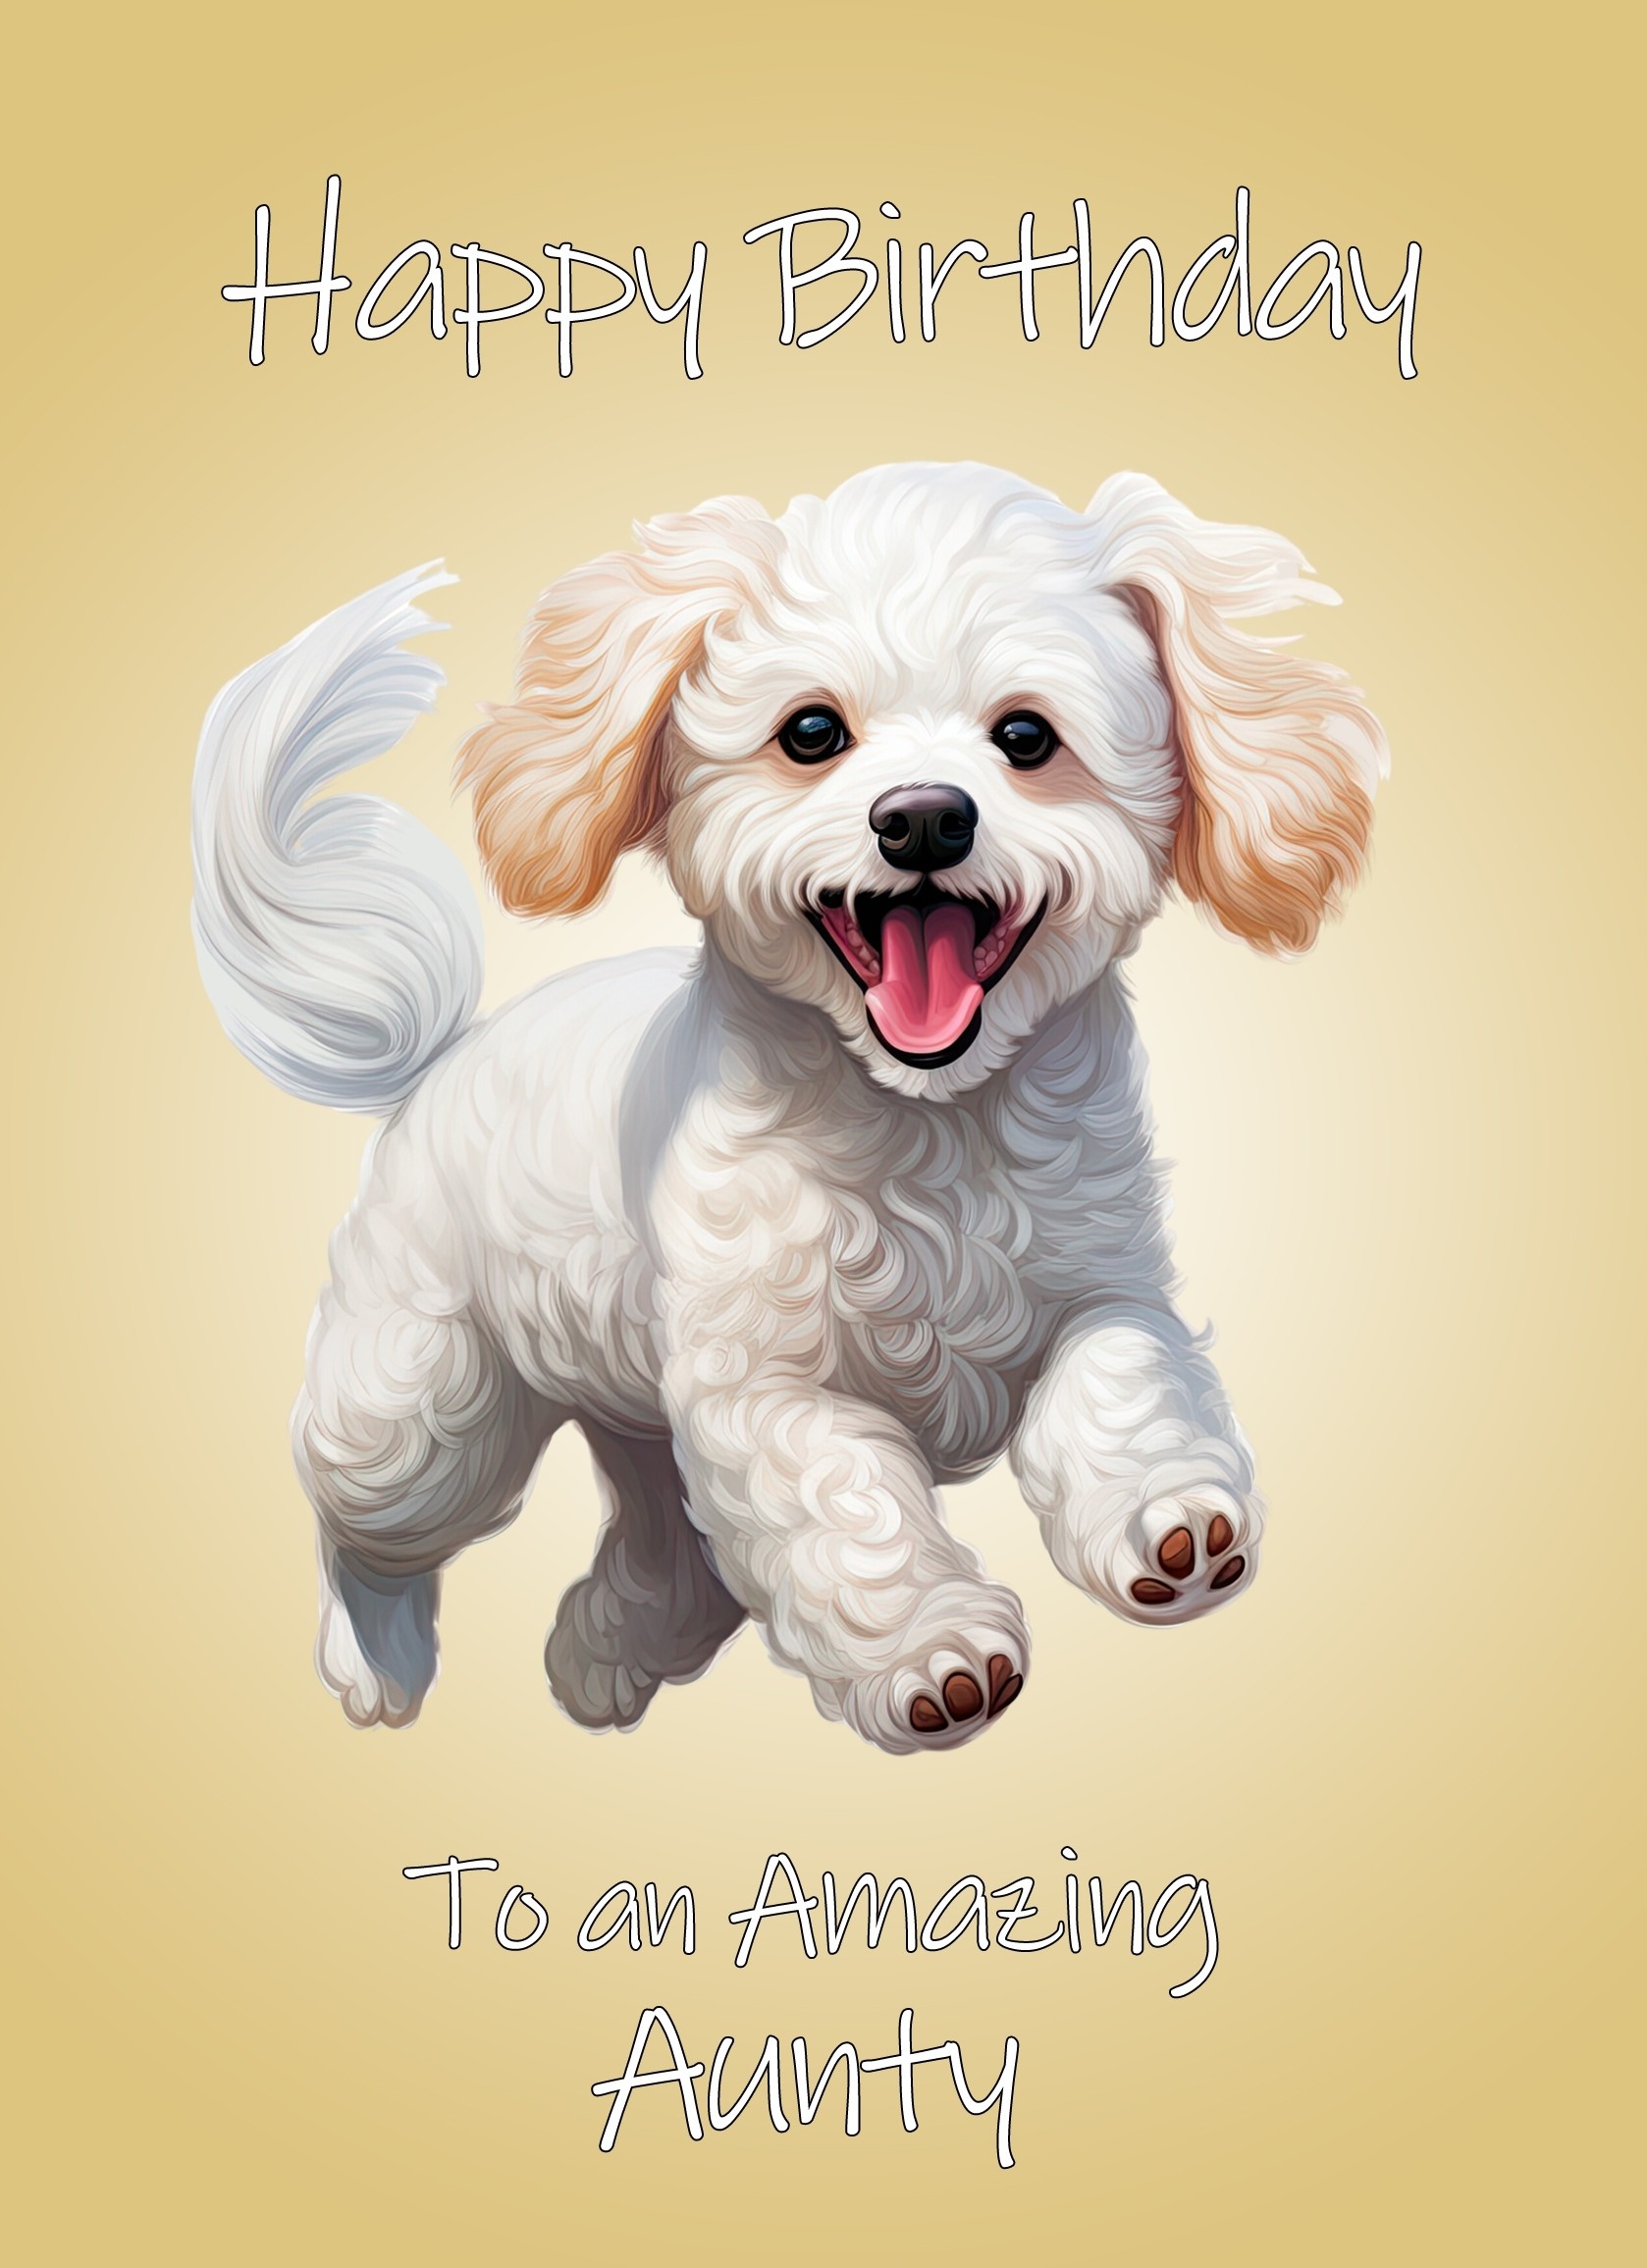 Poodle Dog Birthday Card For Aunty